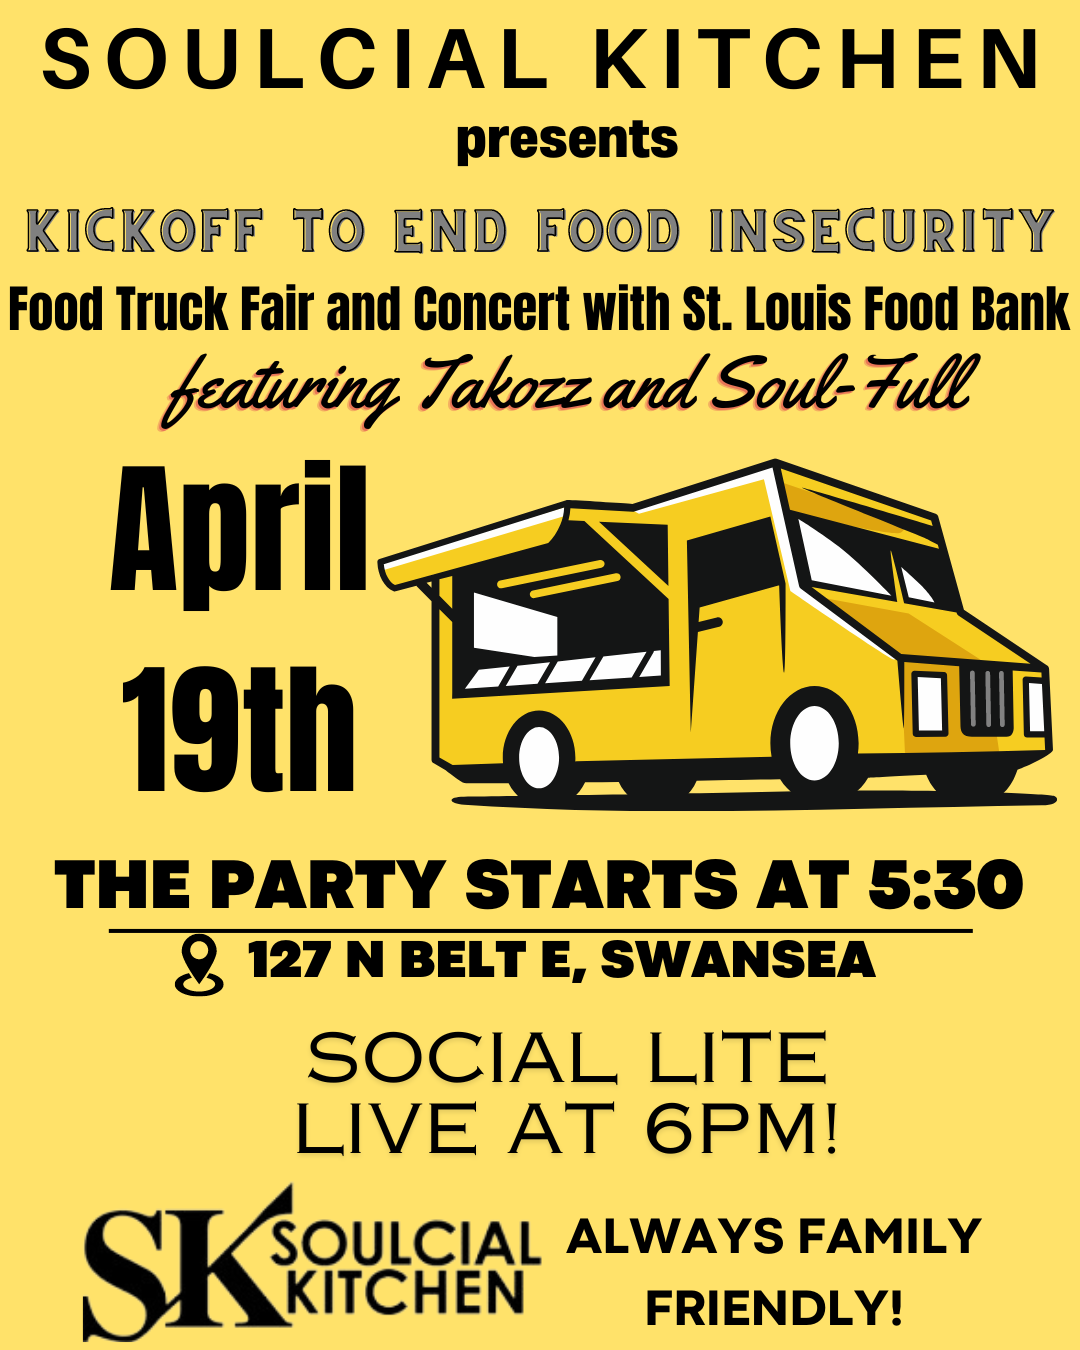 Kickoff Event to End Food Insecurity